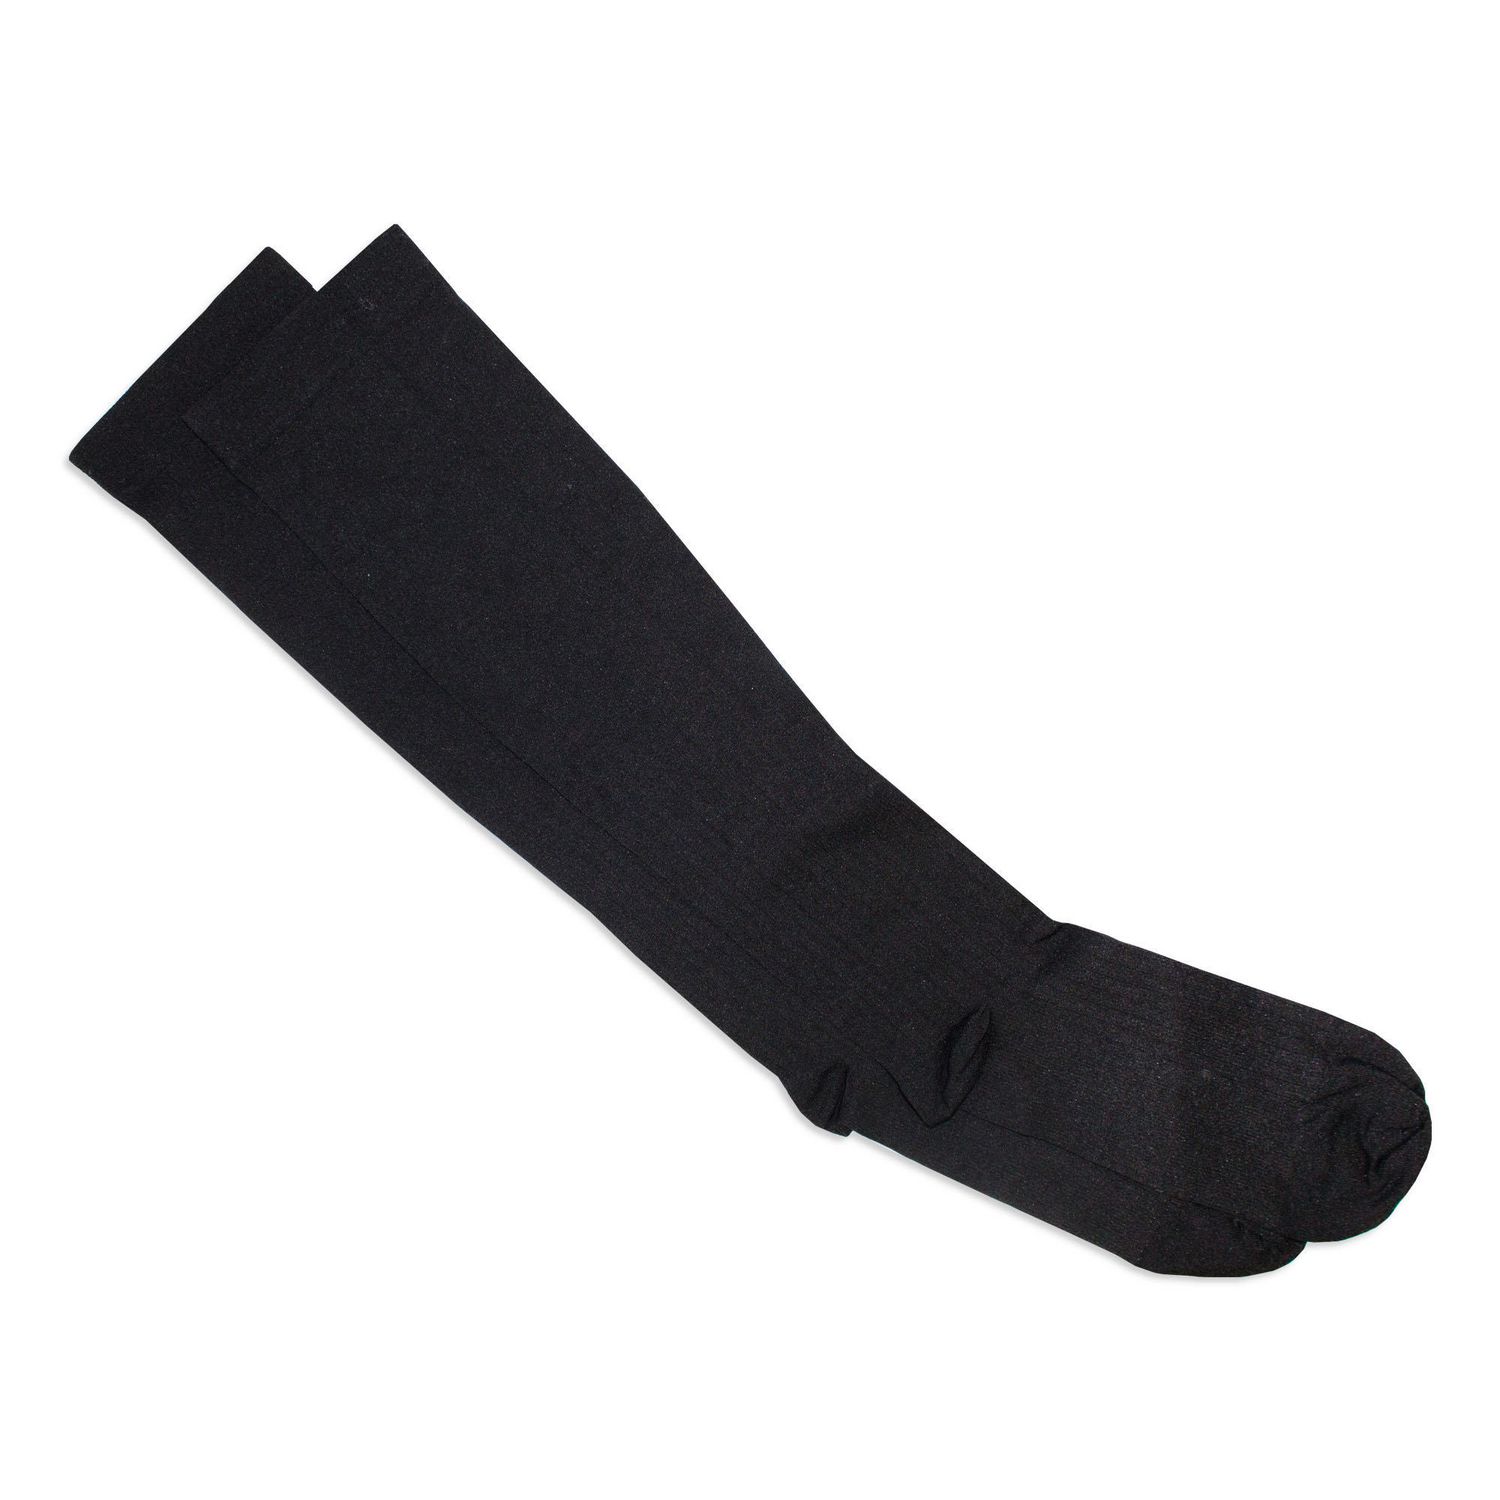 Dr.Scholl's Men's 1 Pair Graduated Compression over The Calf Socks ...